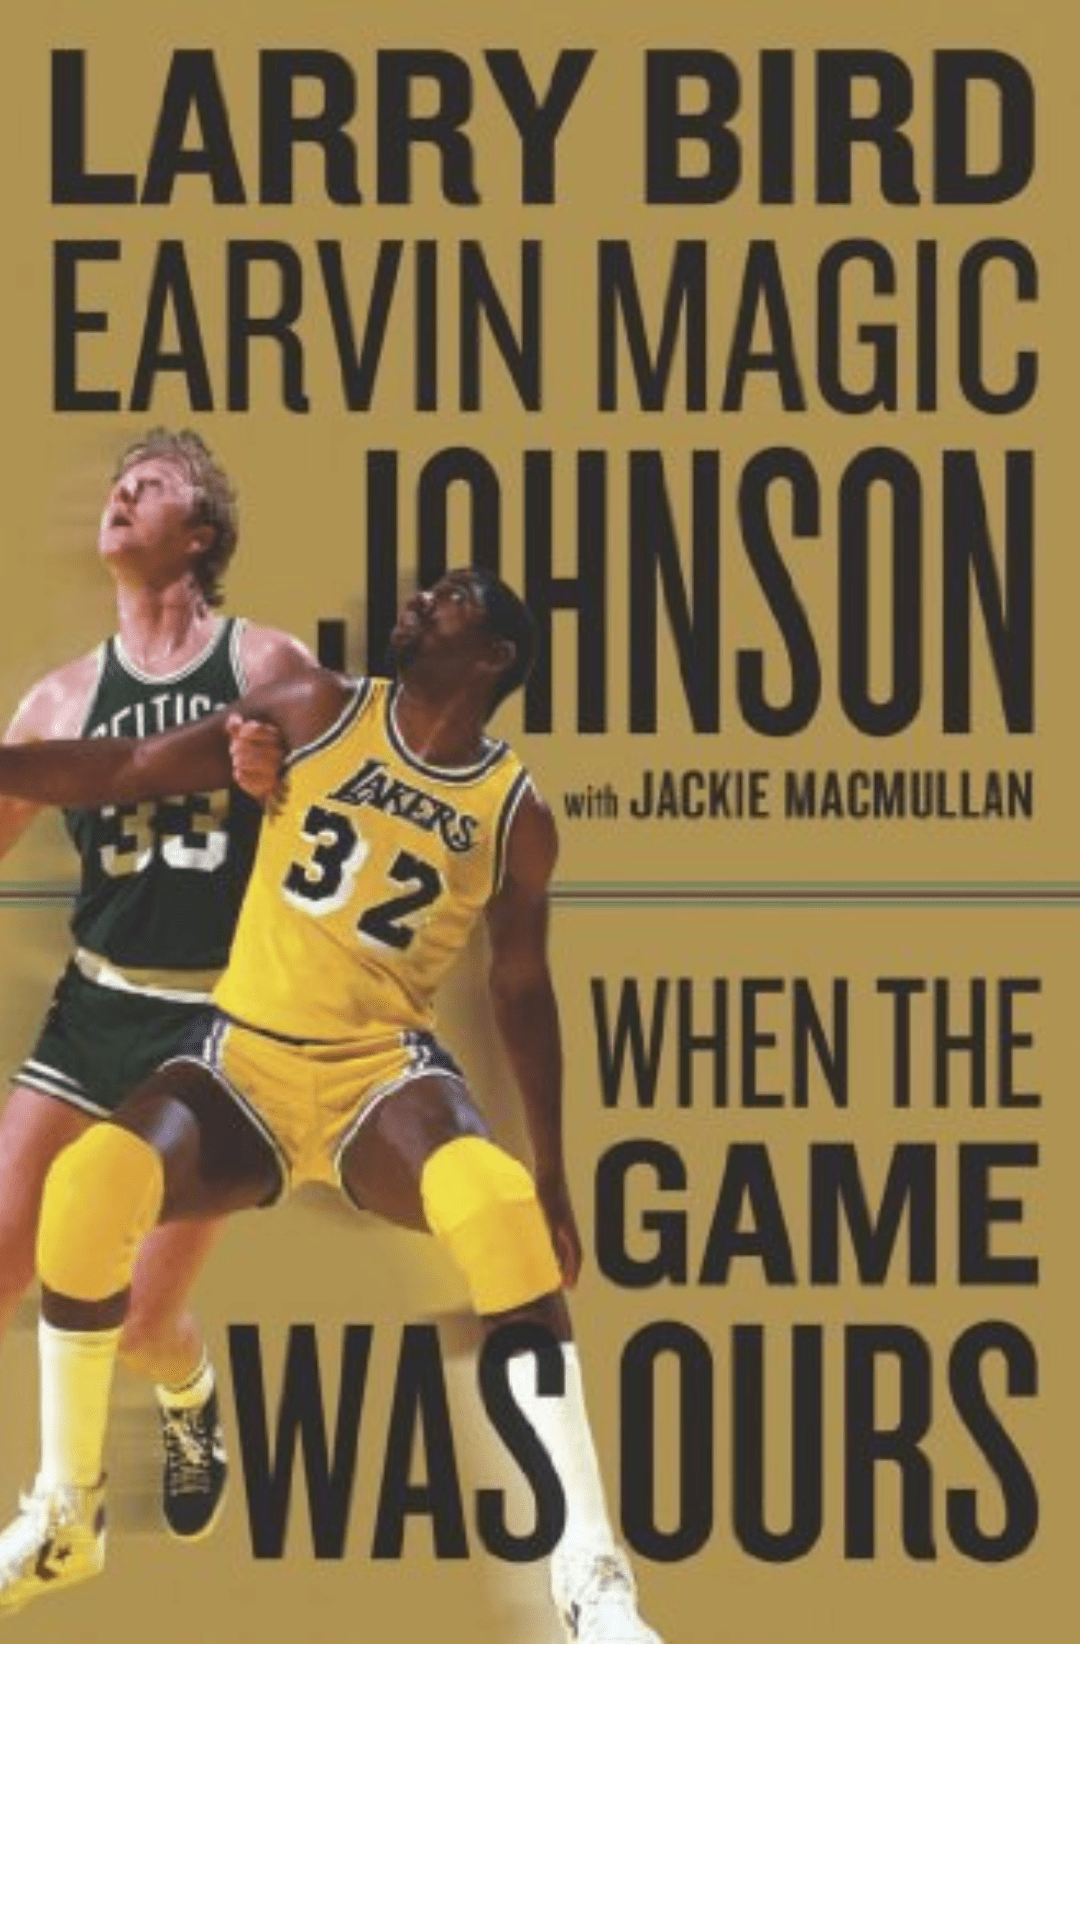 When the Game Was Ours by Larry Bird